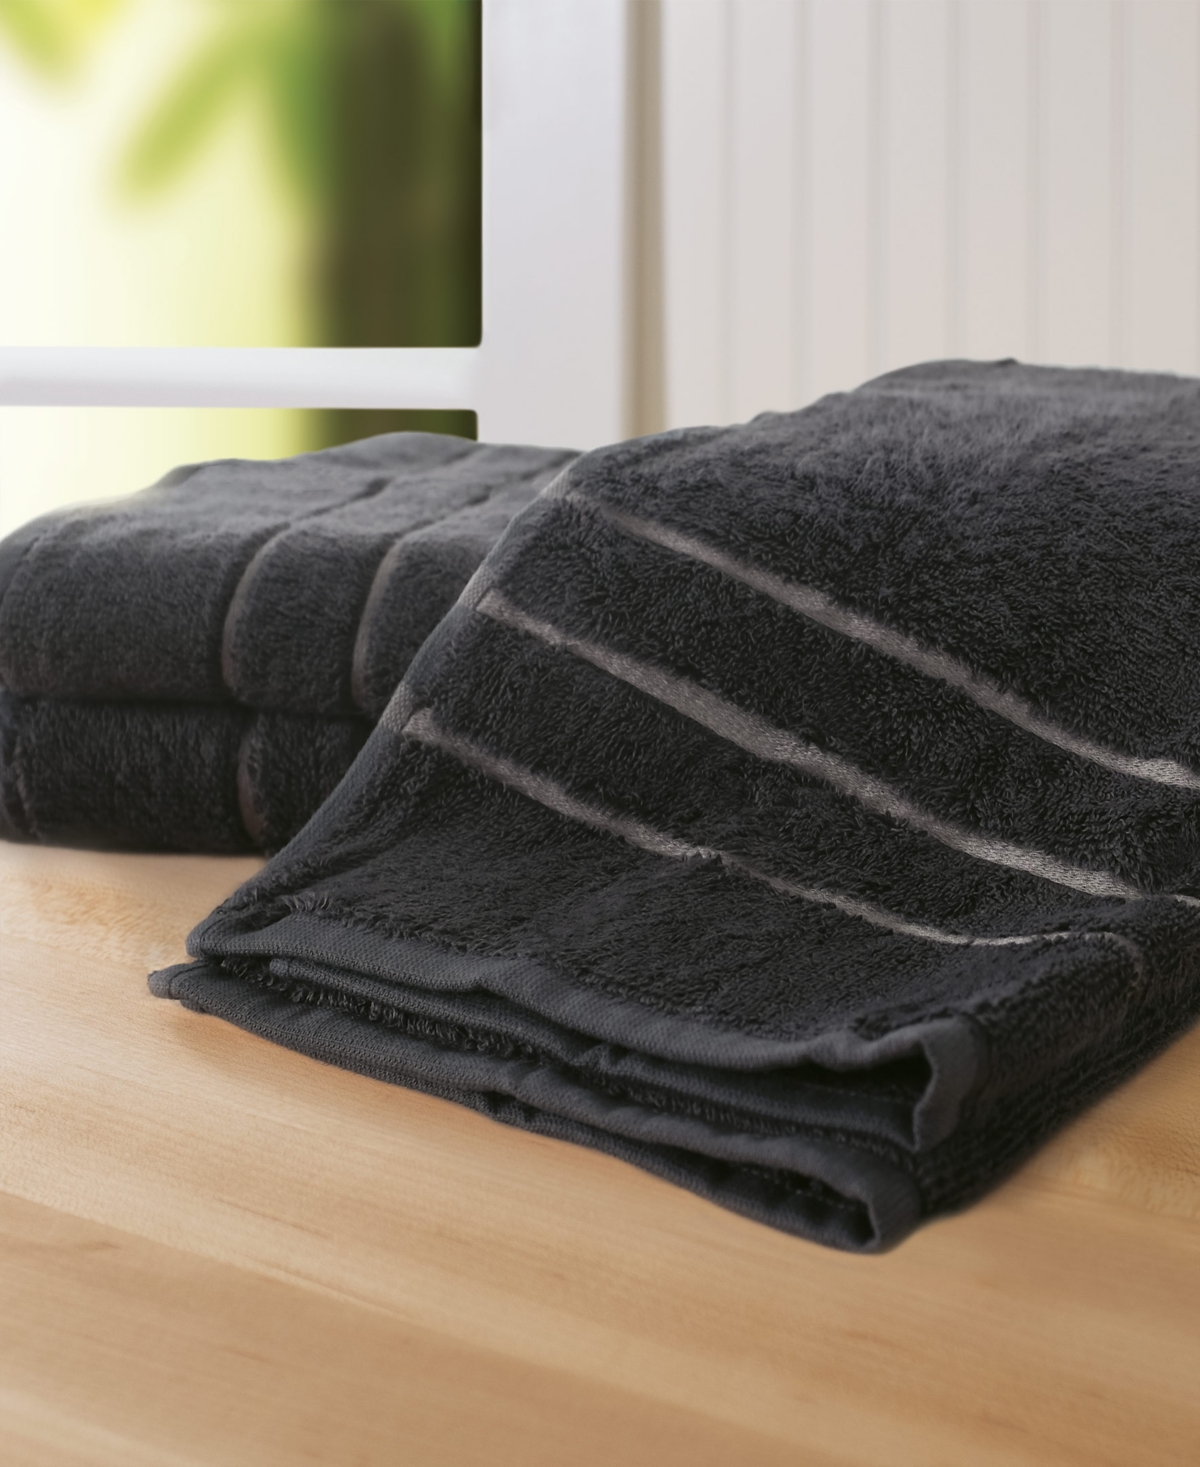 Cariloha 3-piece 30" X 16" Viscose Hand Towel Set In Charcoal